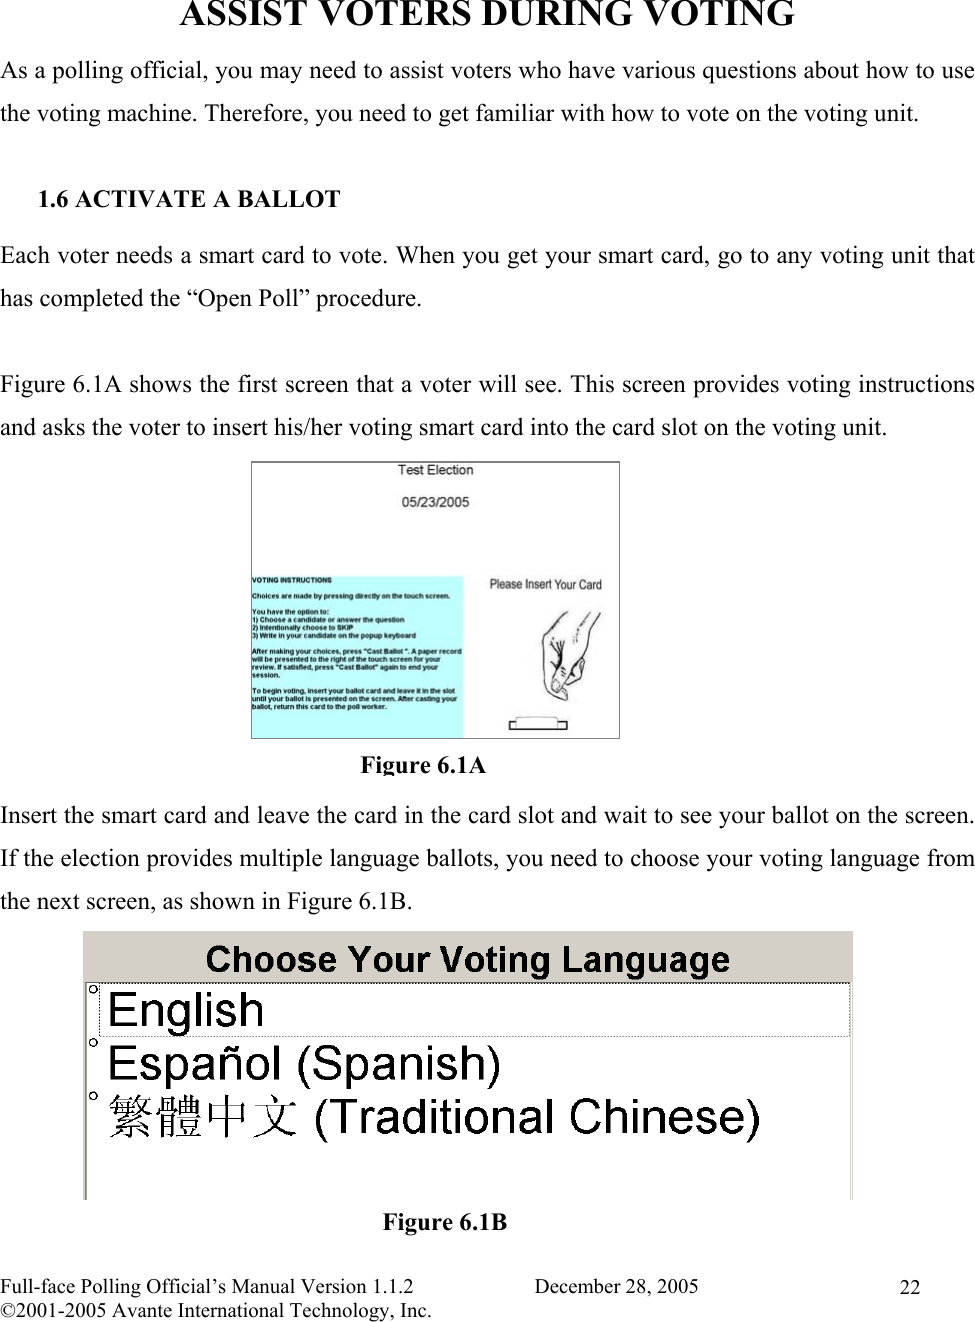    Full-face Polling Official’s Manual Version 1.1.2                       December 28, 2005 ©2001-2005 Avante International Technology, Inc.   22 ASSIST VOTERS DURING VOTING As a polling official, you may need to assist voters who have various questions about how to use the voting machine. Therefore, you need to get familiar with how to vote on the voting unit.  1.6 ACTIVATE A BALLOT Each voter needs a smart card to vote. When you get your smart card, go to any voting unit that has completed the “Open Poll” procedure.  Figure 6.1A shows the first screen that a voter will see. This screen provides voting instructions and asks the voter to insert his/her voting smart card into the card slot on the voting unit.          Insert the smart card and leave the card in the card slot and wait to see your ballot on the screen. If the election provides multiple language ballots, you need to choose your voting language from the next screen, as shown in Figure 6.1B.        Figure 6.1AFigure 6.1B